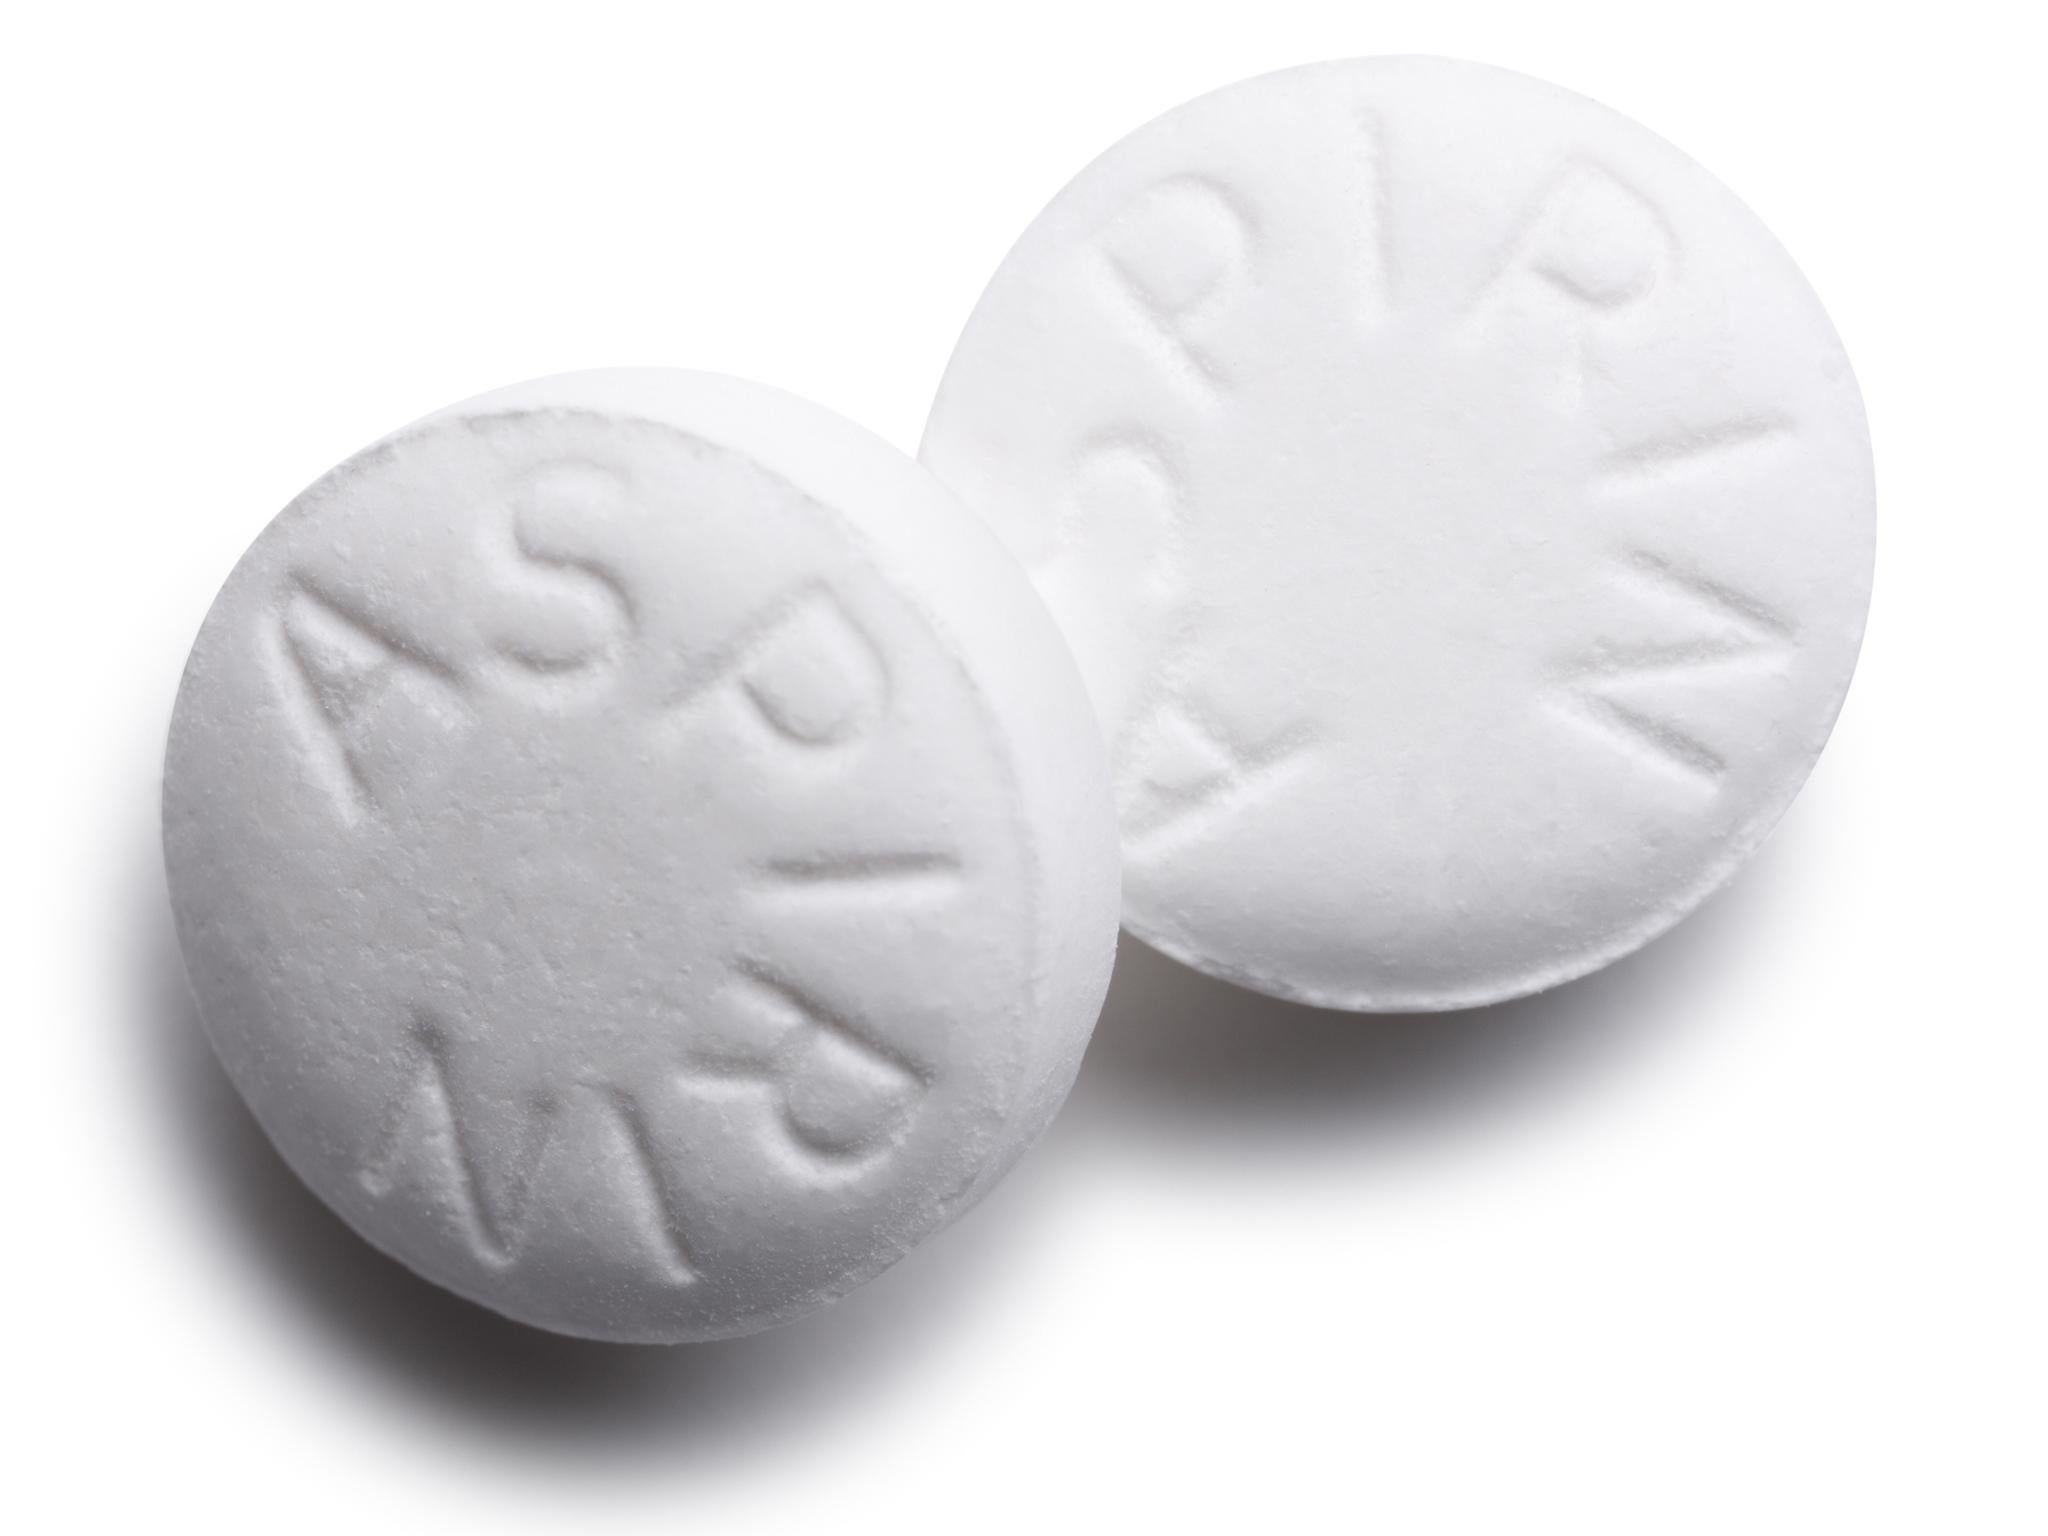 Daily aspirin is unnecessary for older people in good health, study finds